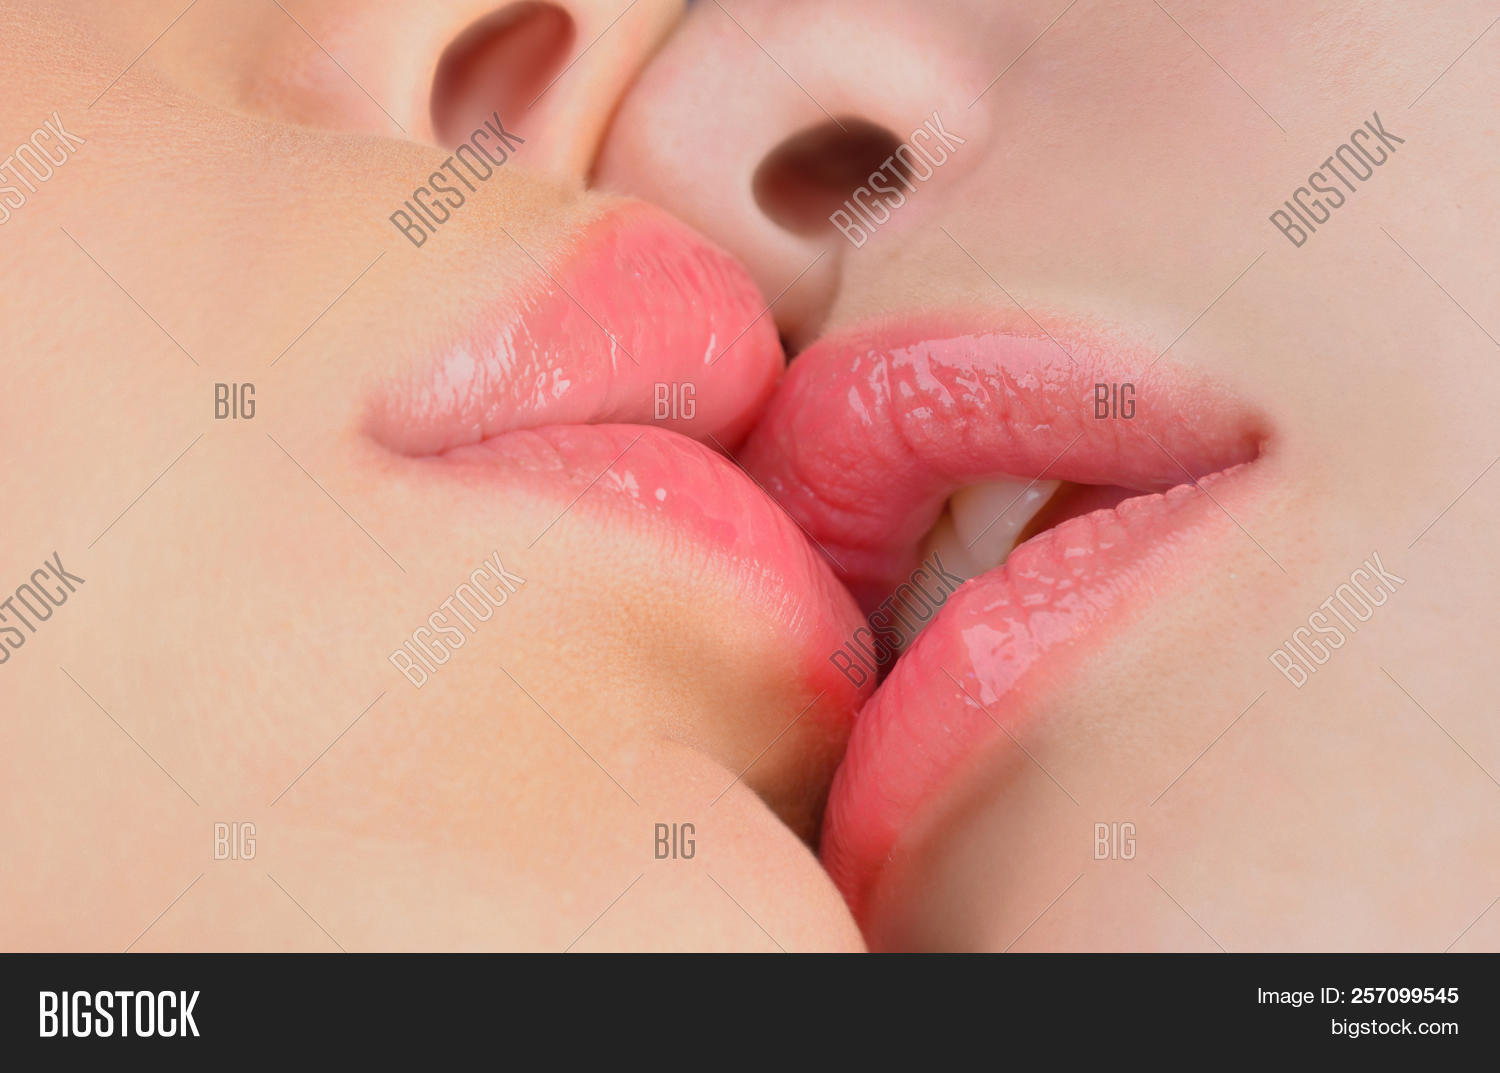 dilushi fernando recommends sexy lesbians tongue kissing pic